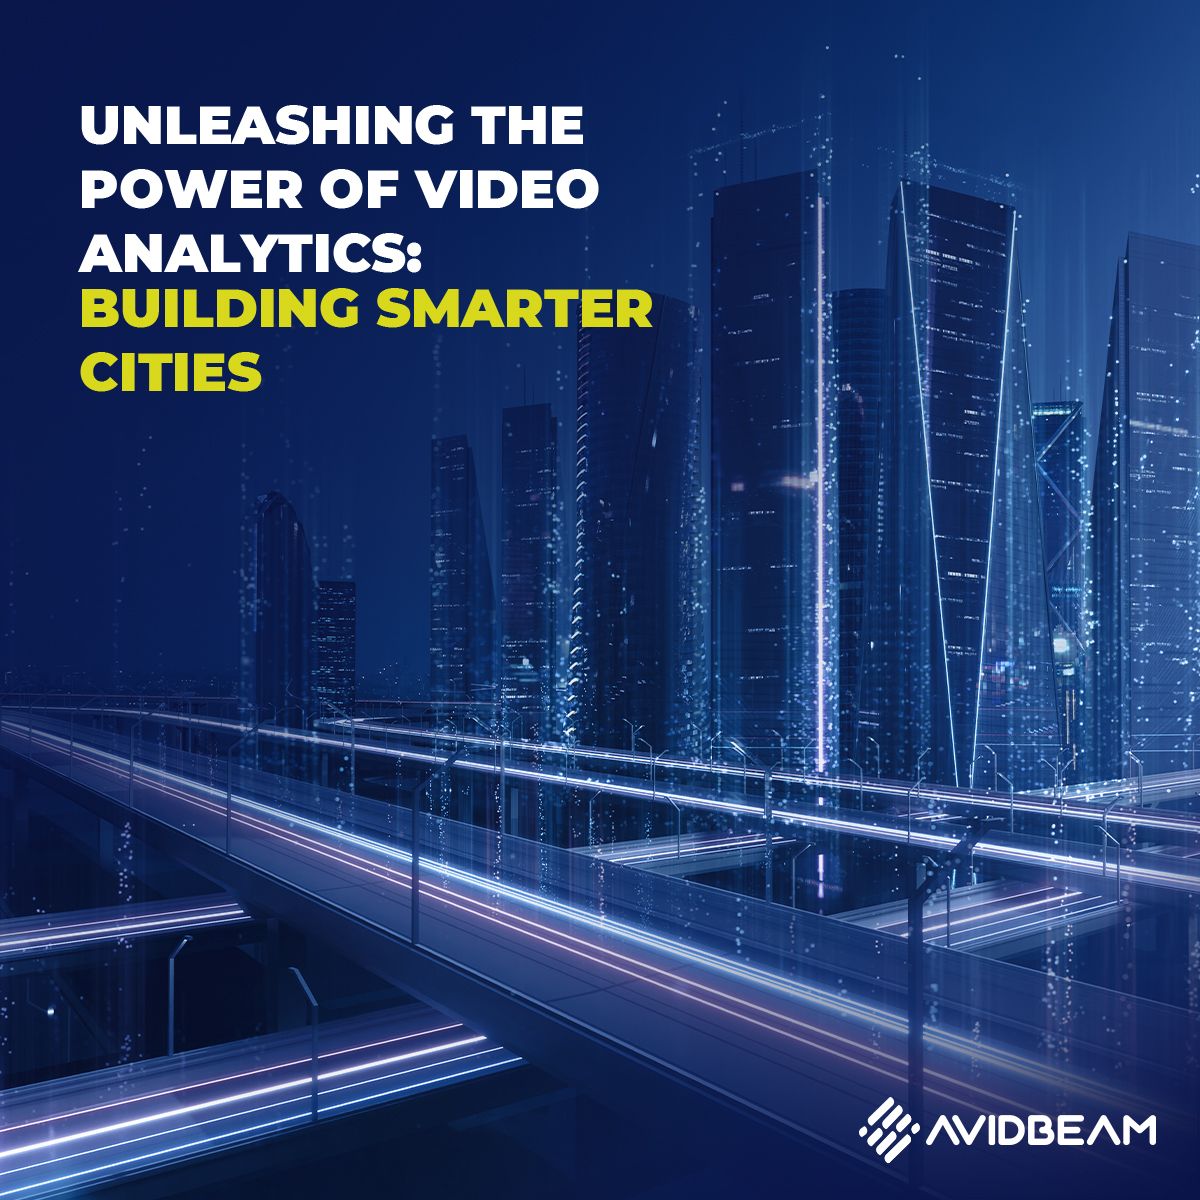 The power of video analytics is building smarter cities!
Dive into our blog to explore how cutting-edge technology is transforming urban landscapes.

Check out the full blog! avidbeam.com/building-smart…
#Avidbeam #SmartCities #VideoAnalytics